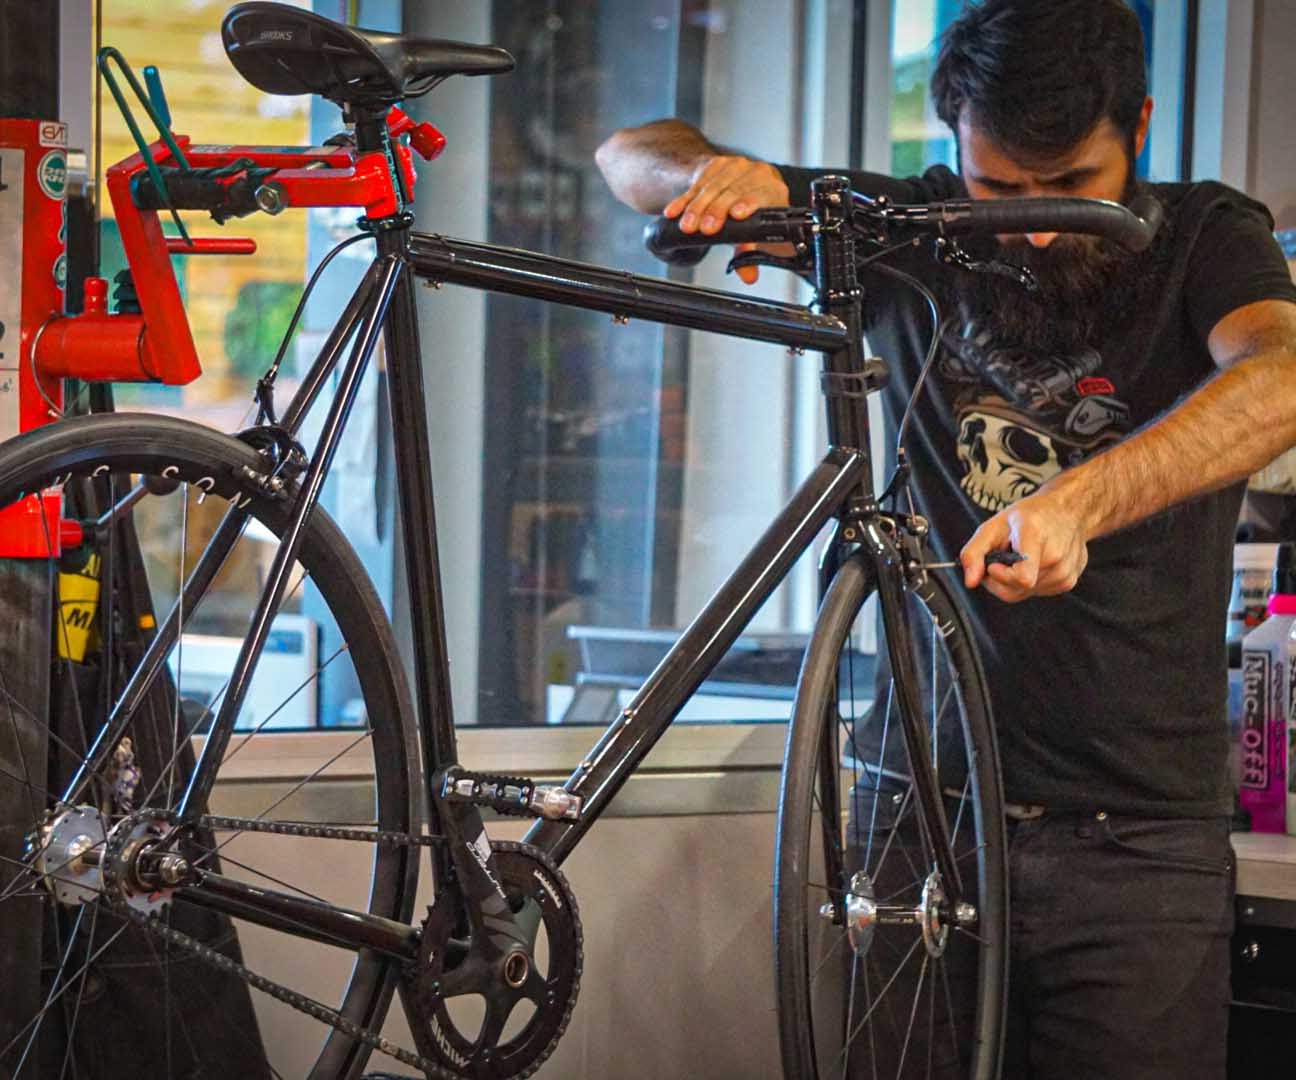 Bicycle Fitter measuring flexibility